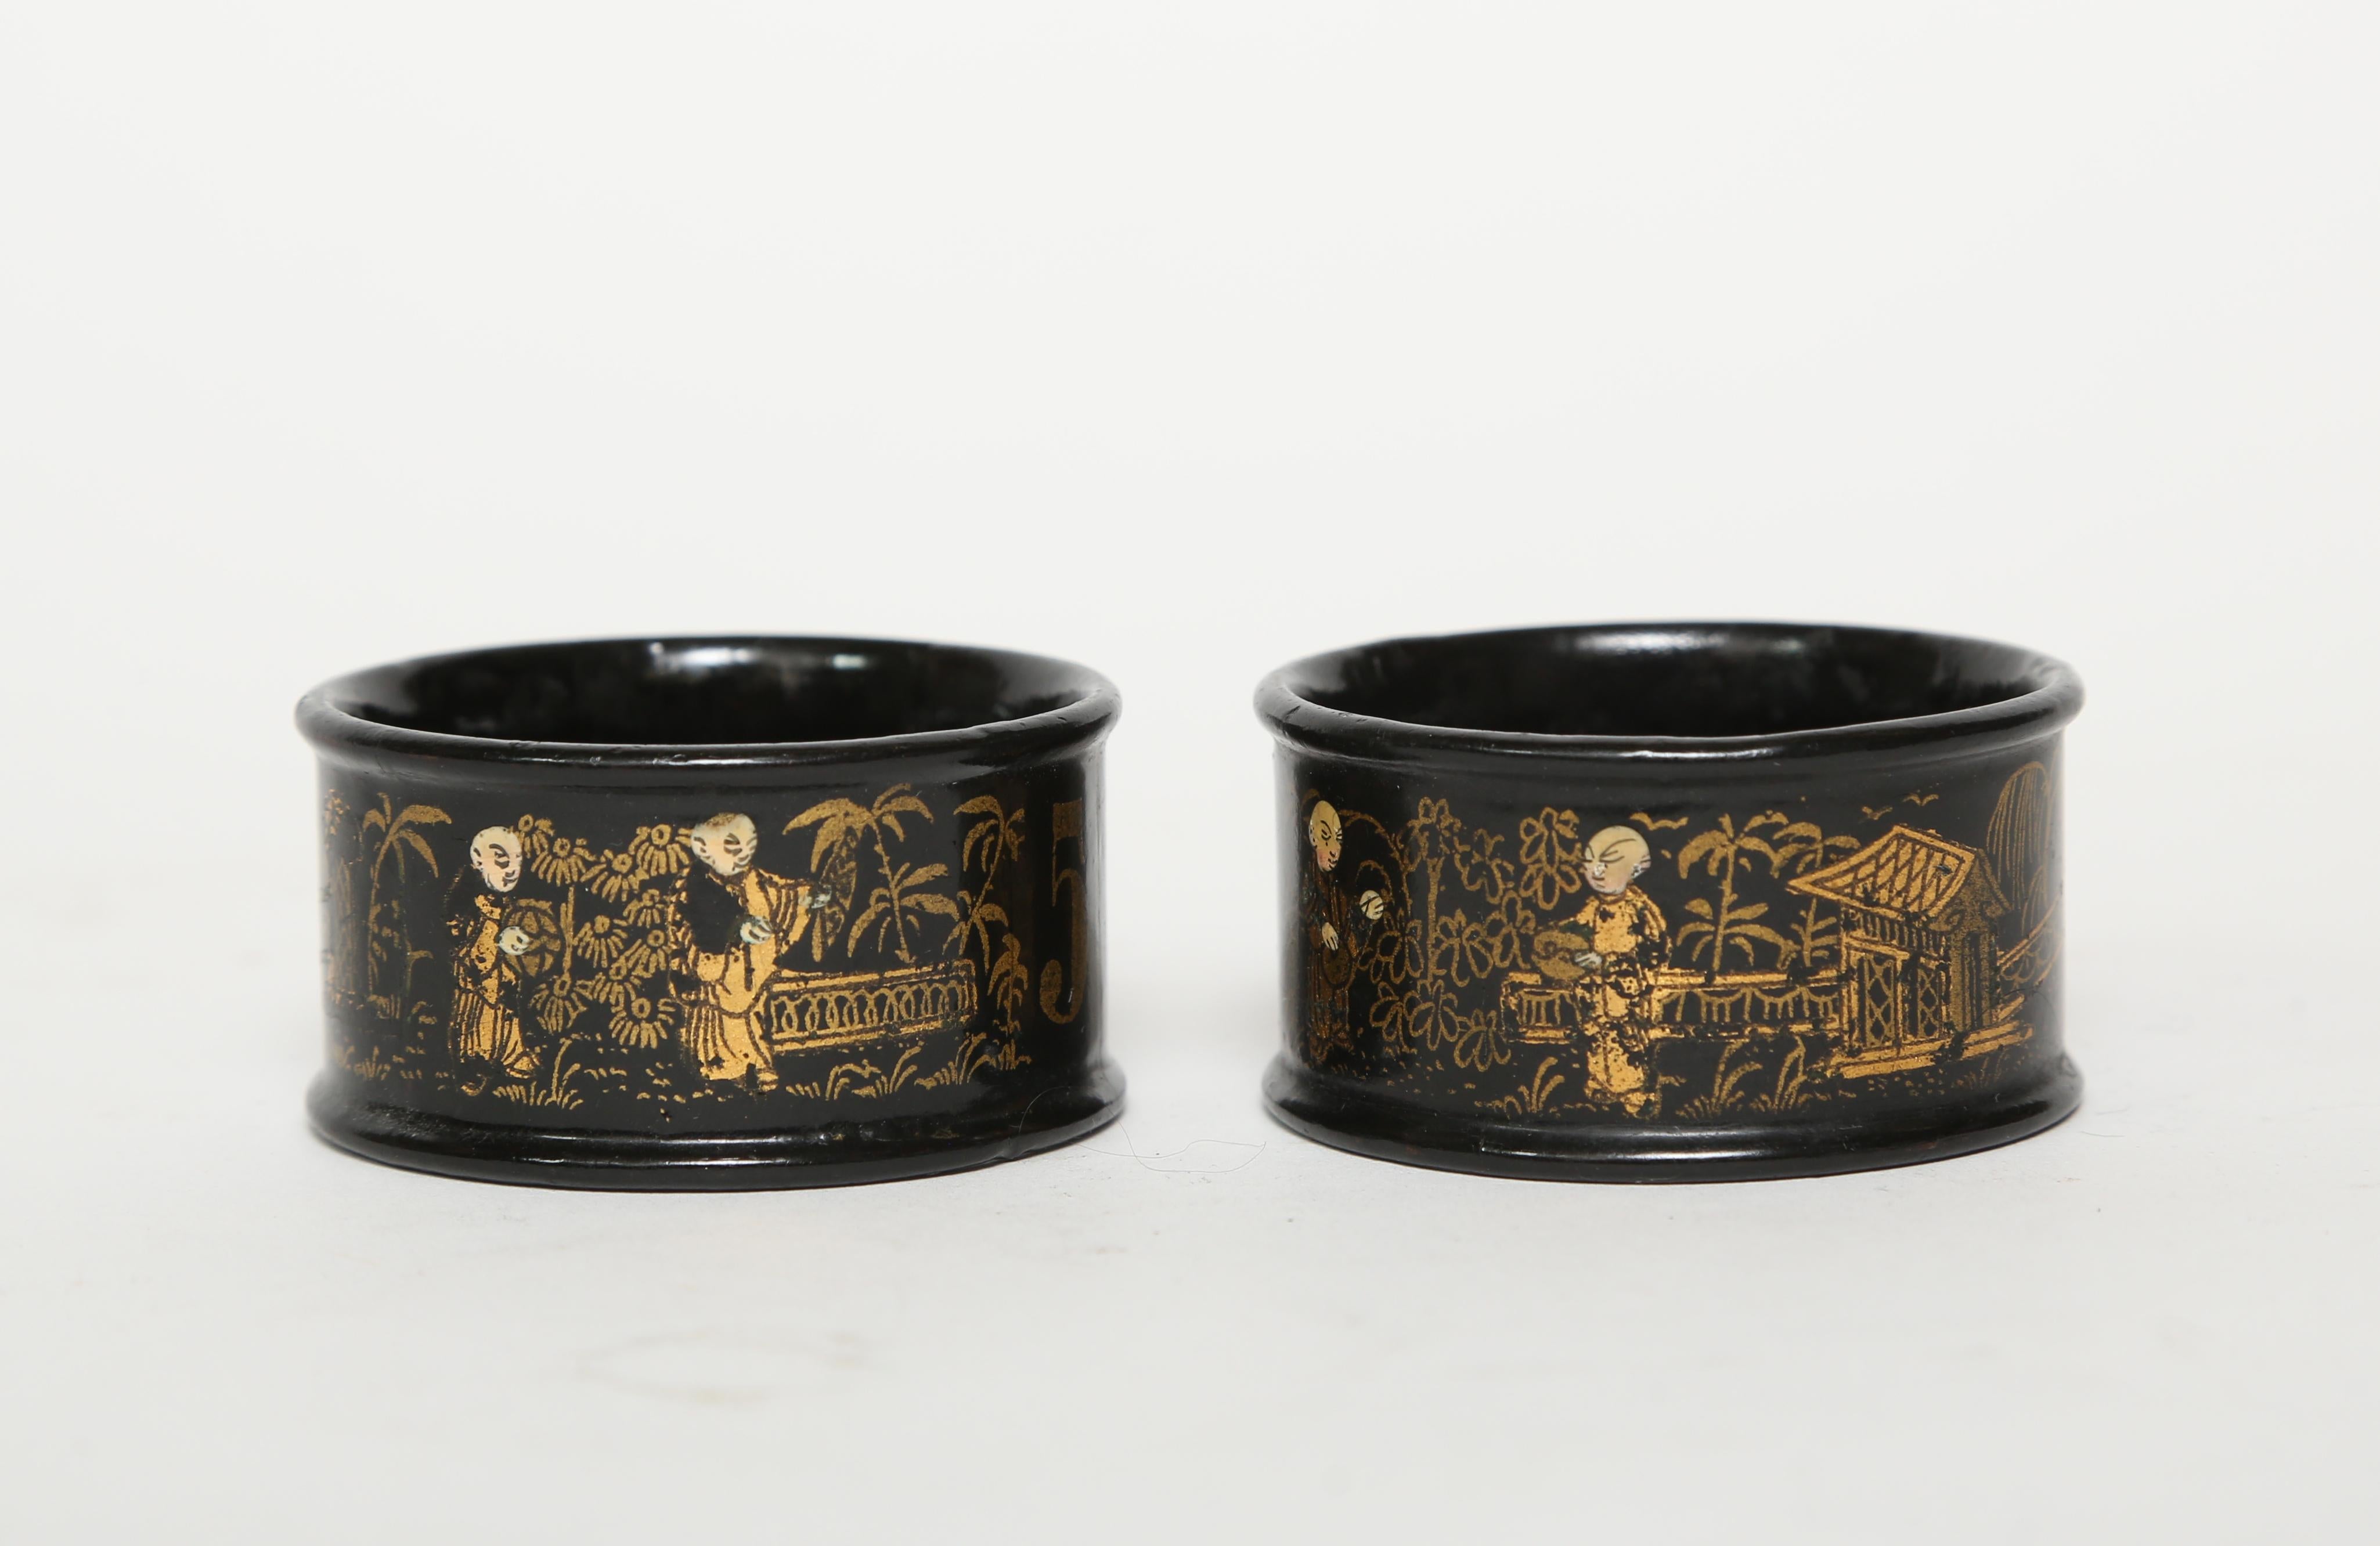 Antique black lacquer on papier mâché napkin rings.  They are in beautiful condition and would look great on a napkin.  If you collect this ware they would be a great addition to your collection.   Probably English and definitely 19th